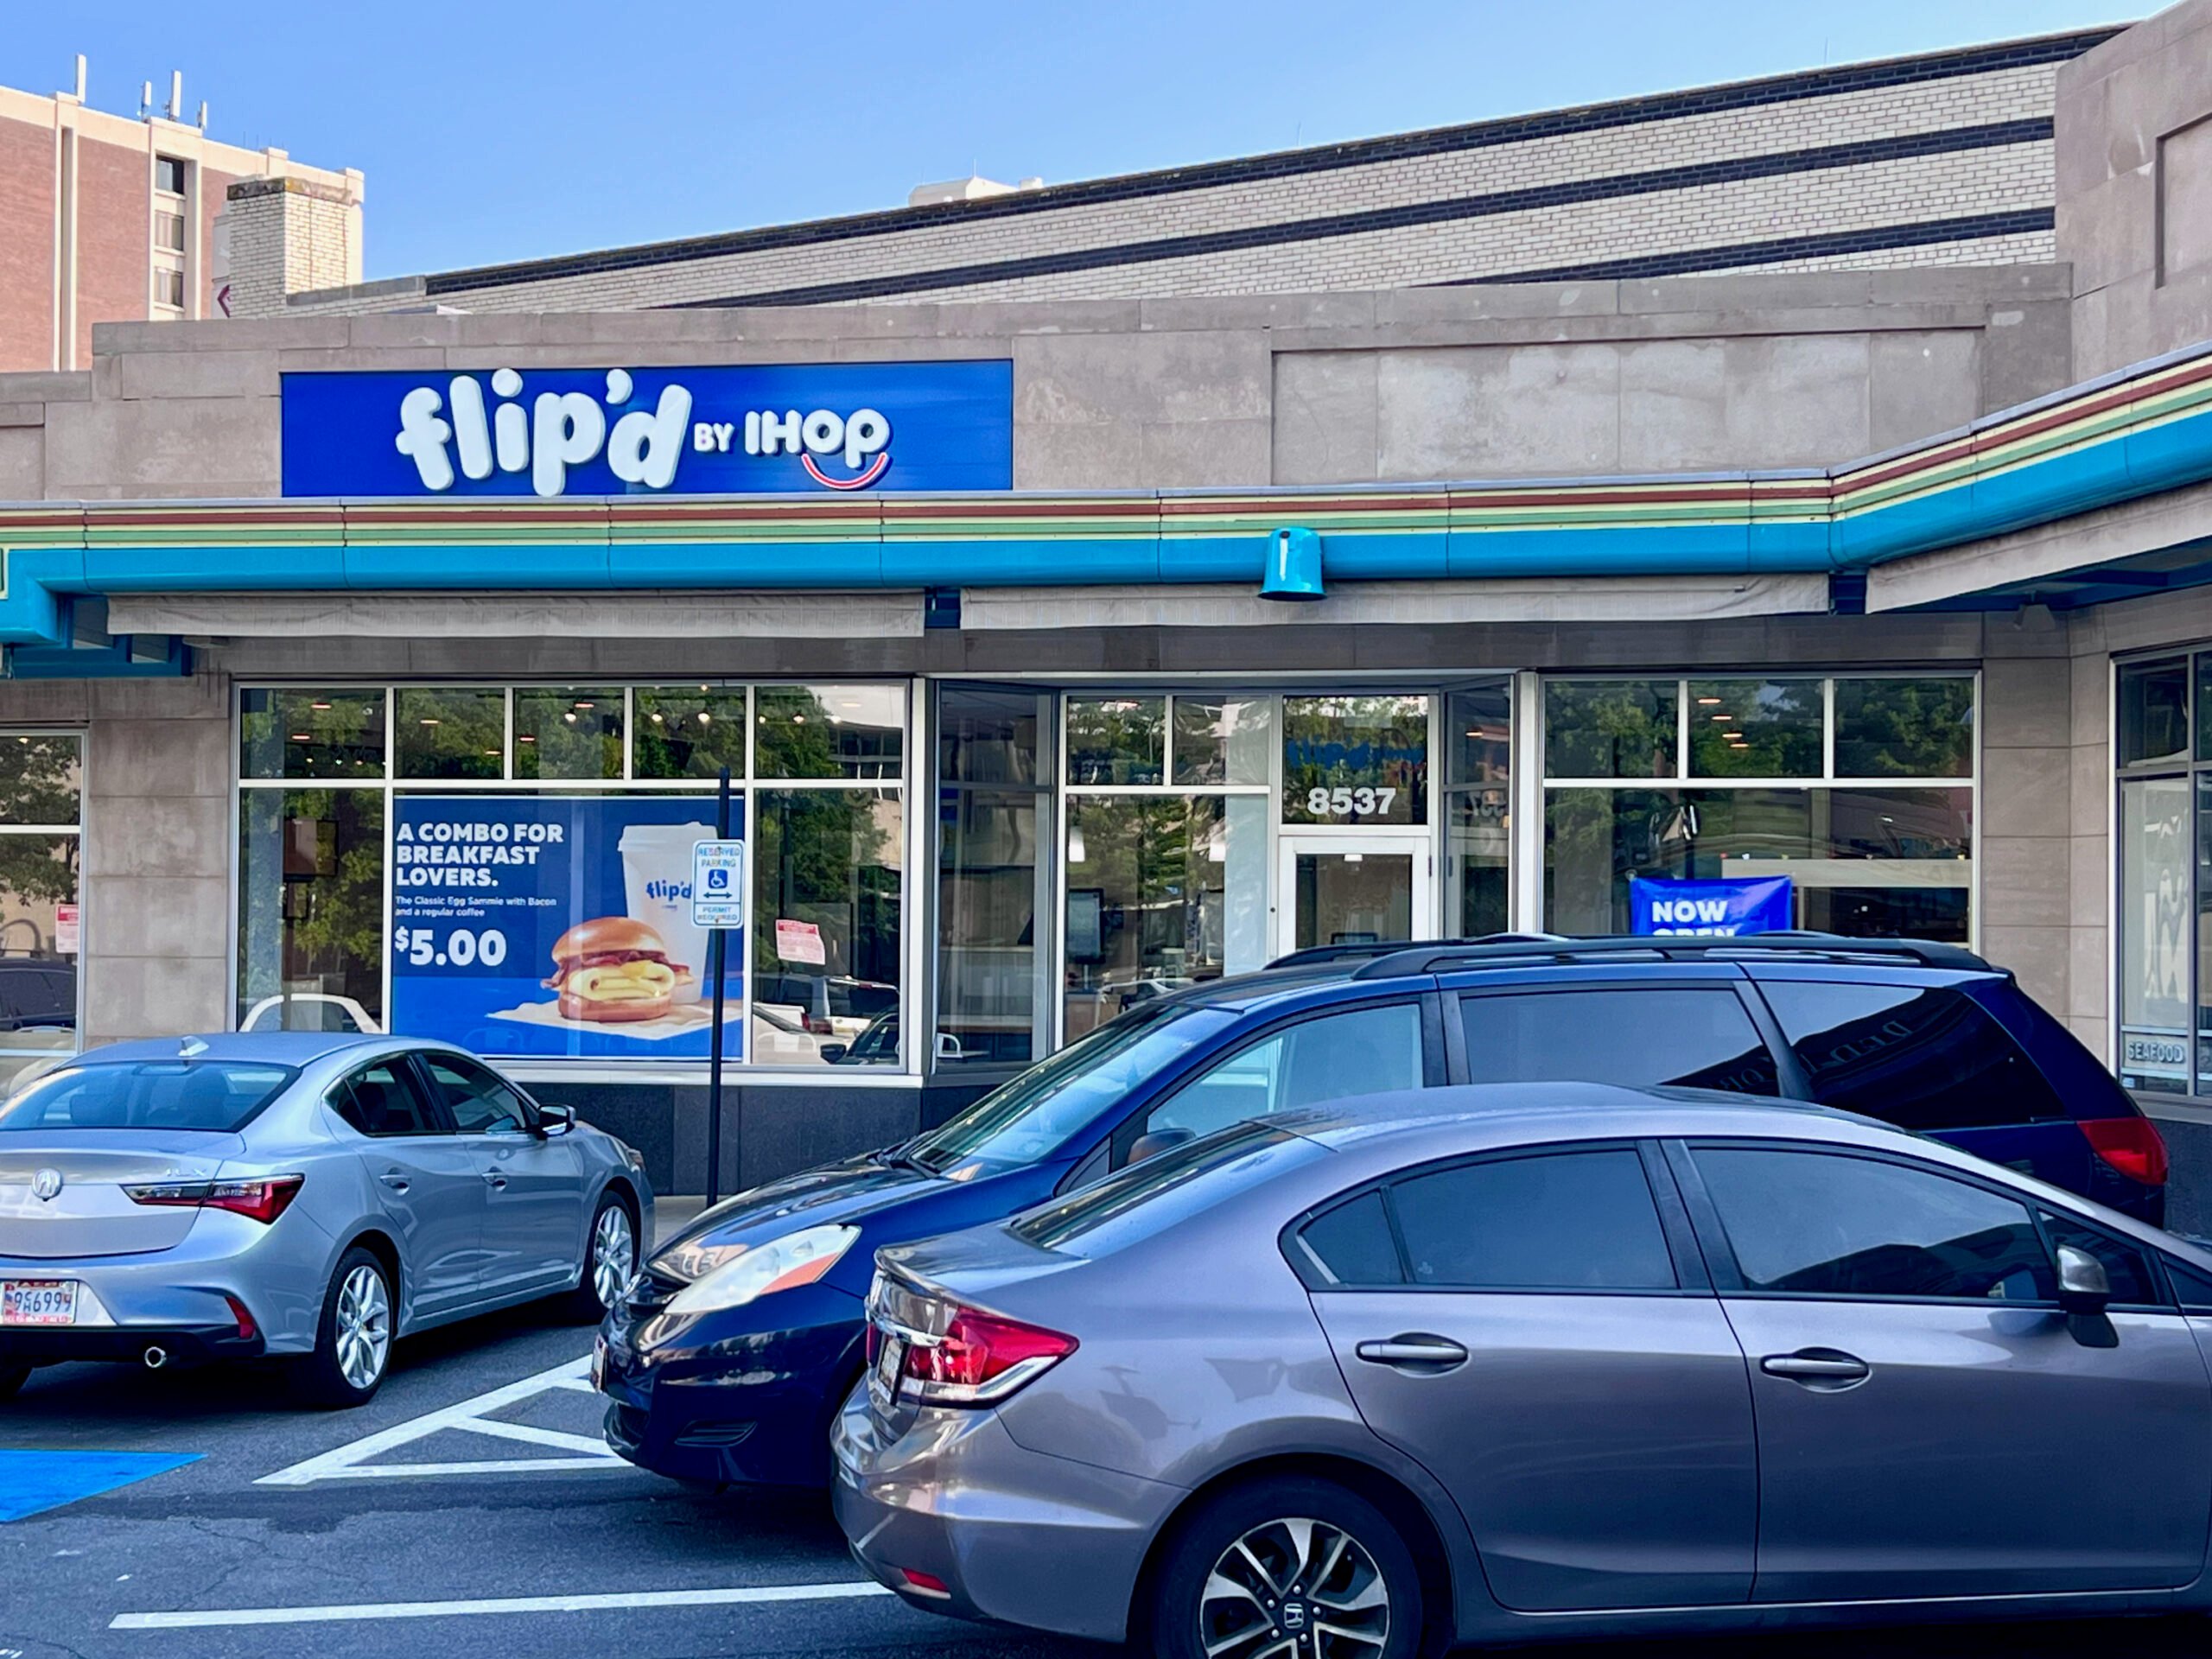 IHOP shuts down its fast-casual spinoff, Flip'd